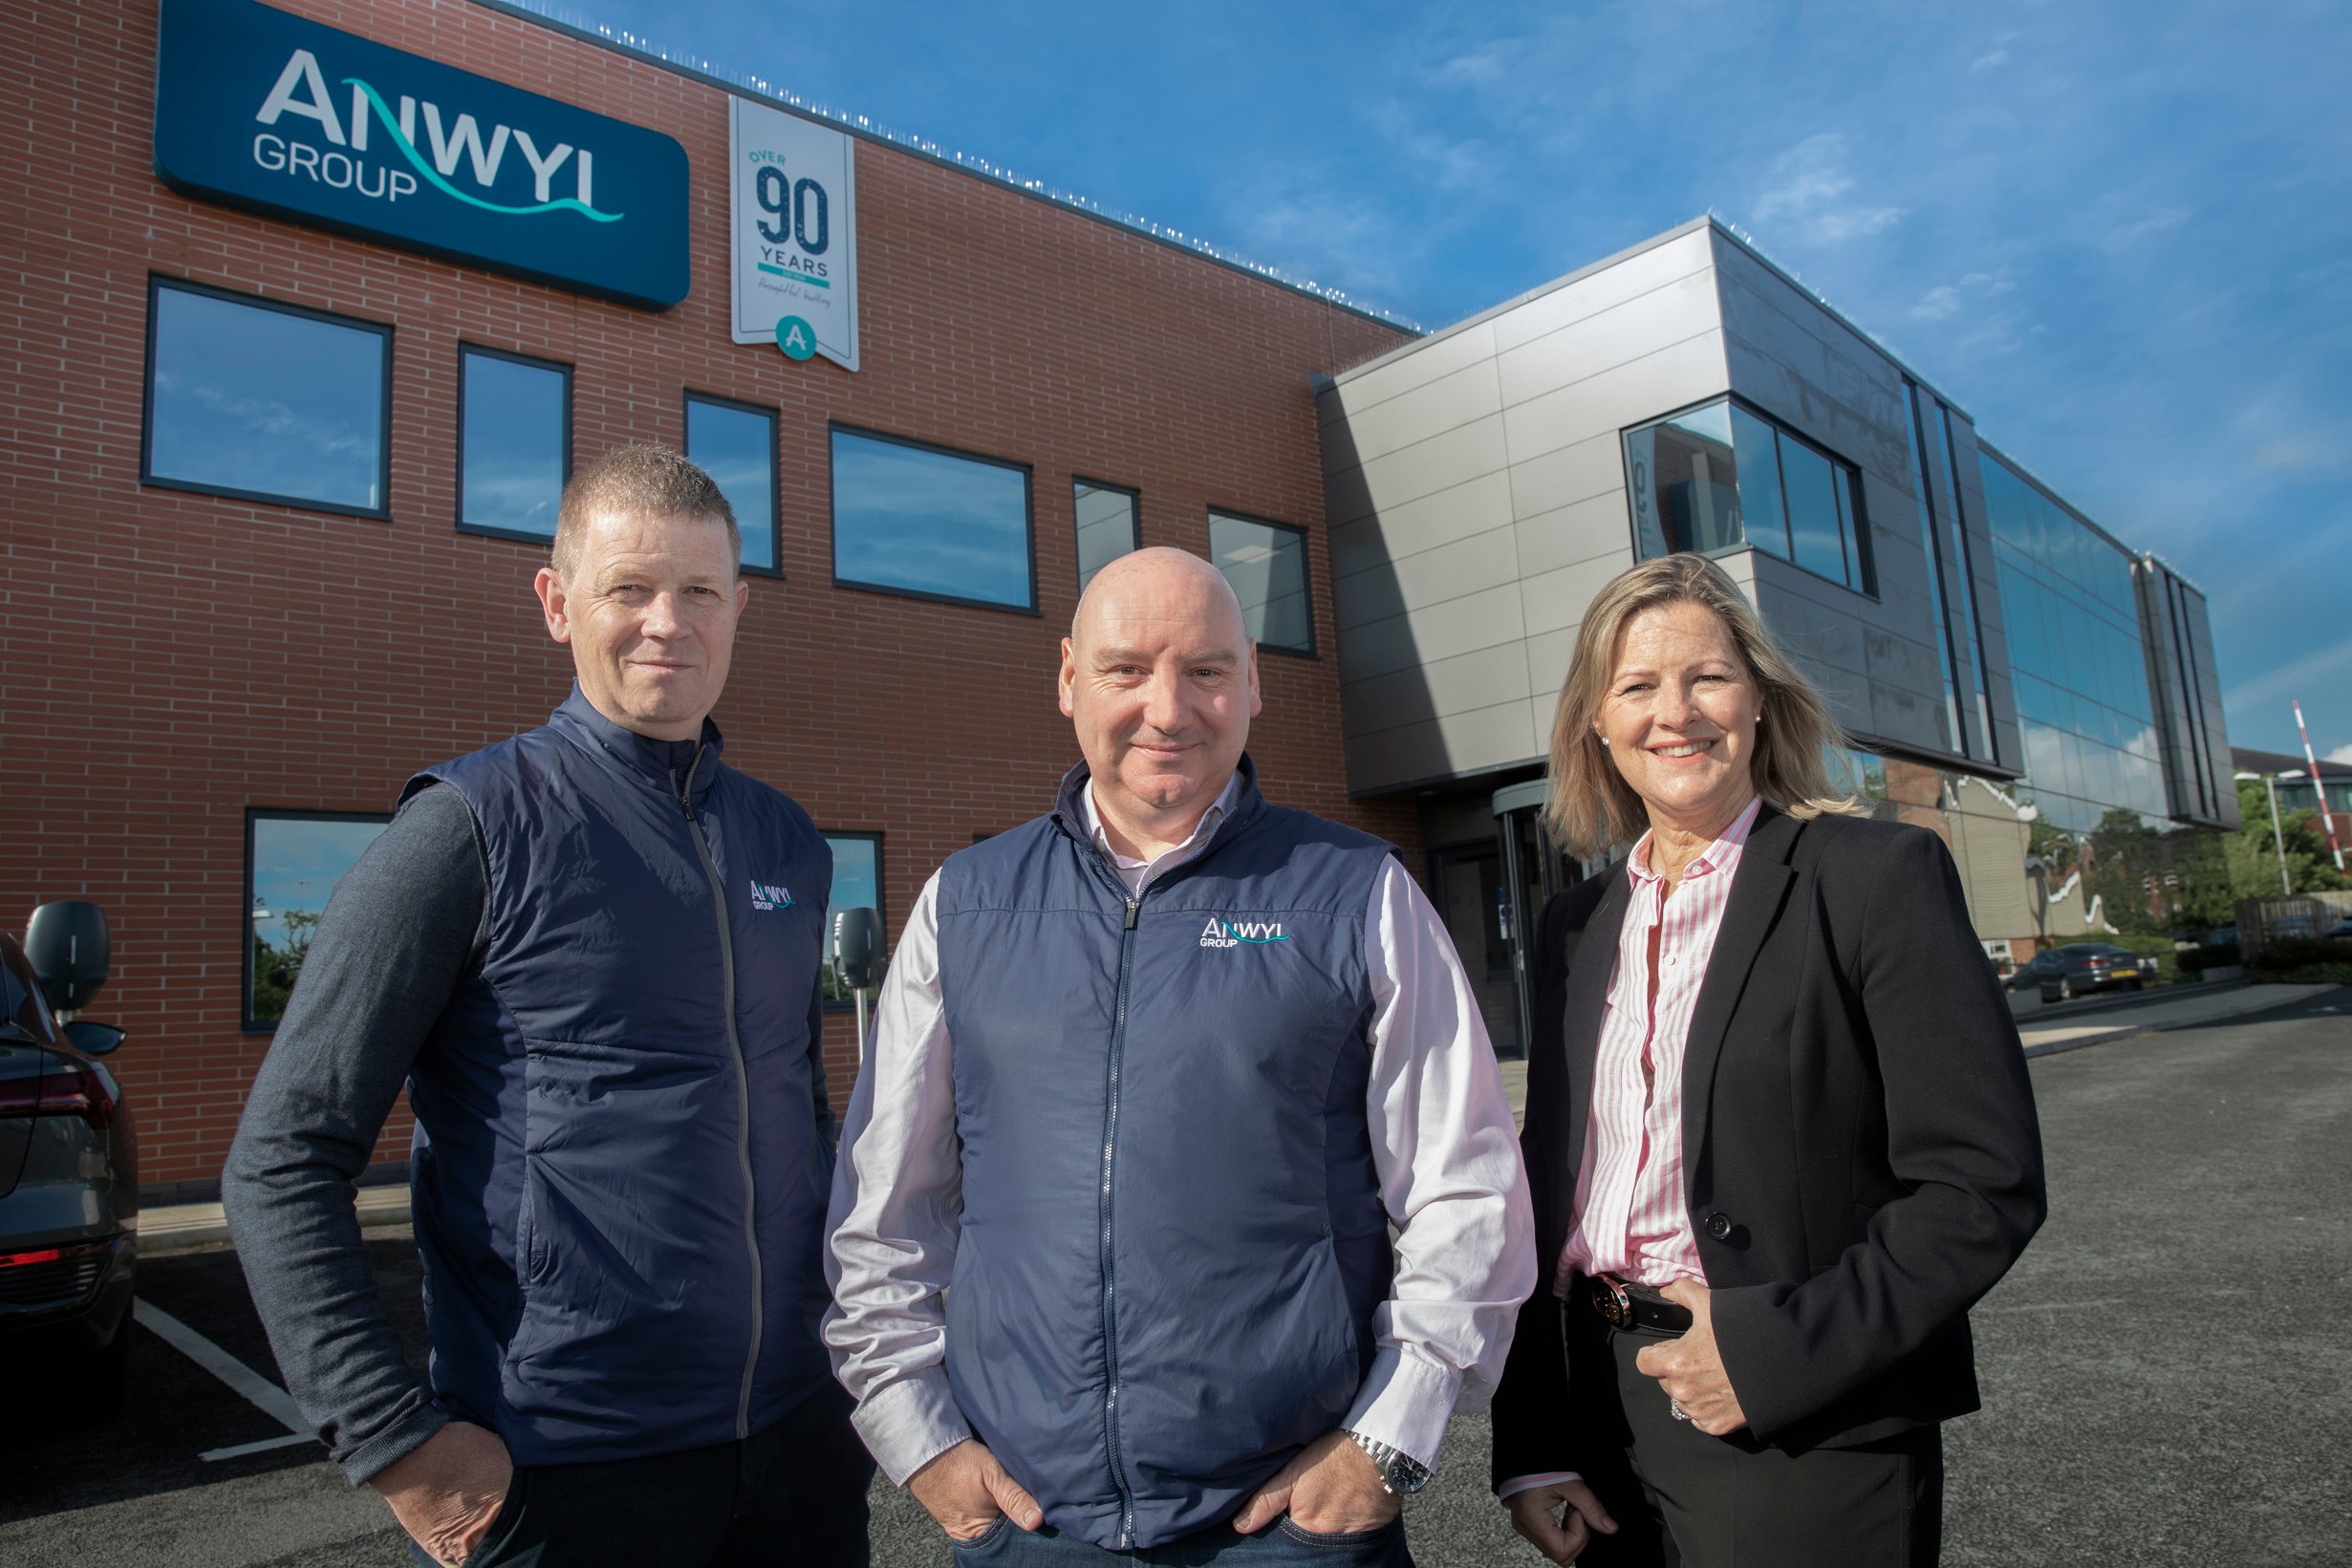 Mathew Anwyl, Phil Dolan and Lucy Wasdell at Anwyl HQ